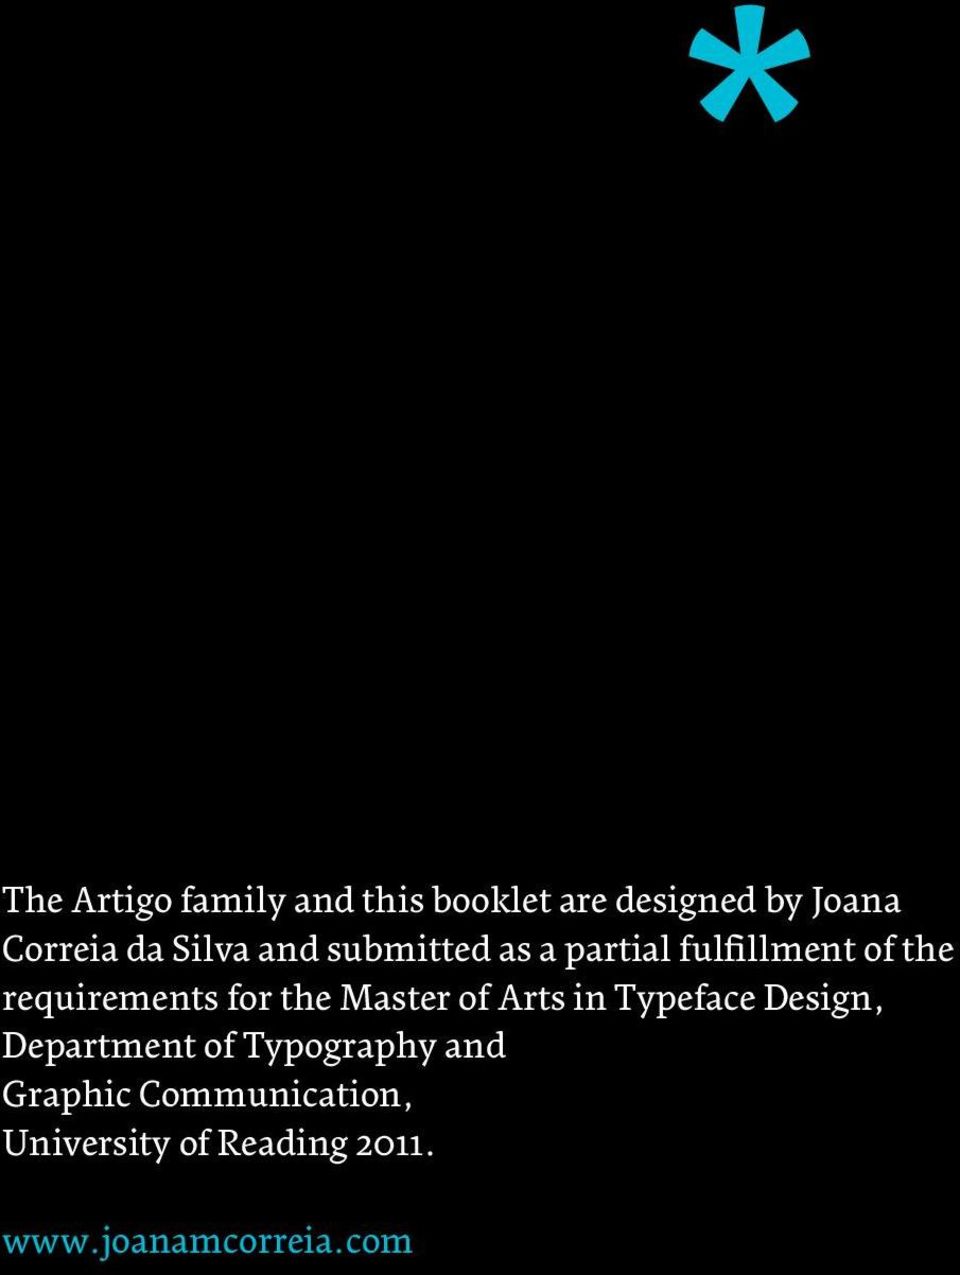 the Master of Arts in Typeface Design, Department of Typography and